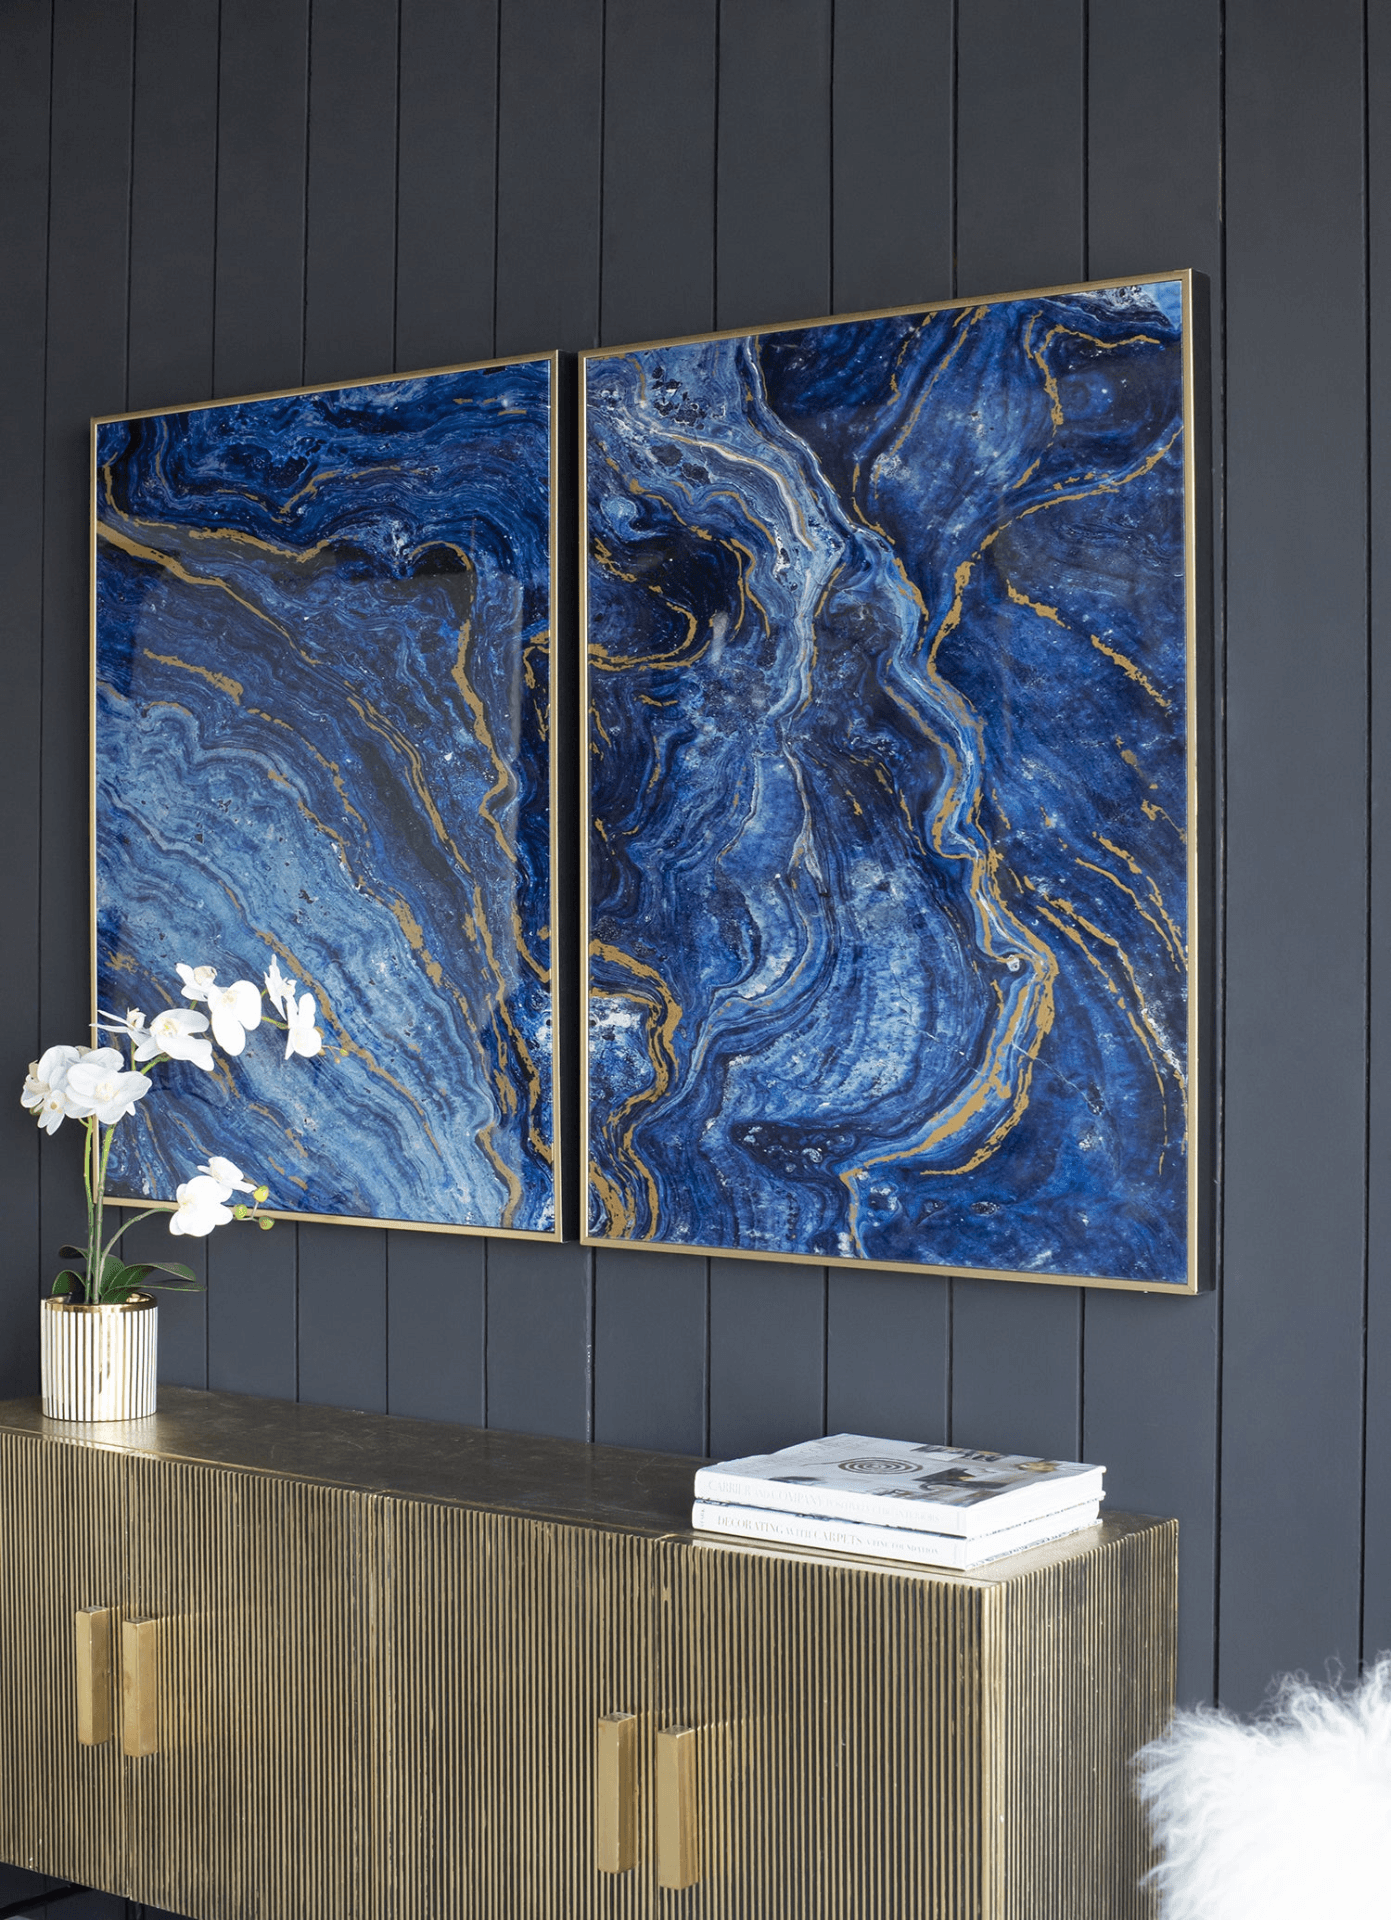 Set of 2 Blue and Gold Framed Art Panels, Unique Marbled Design, 30.5" x 40" - Loomini